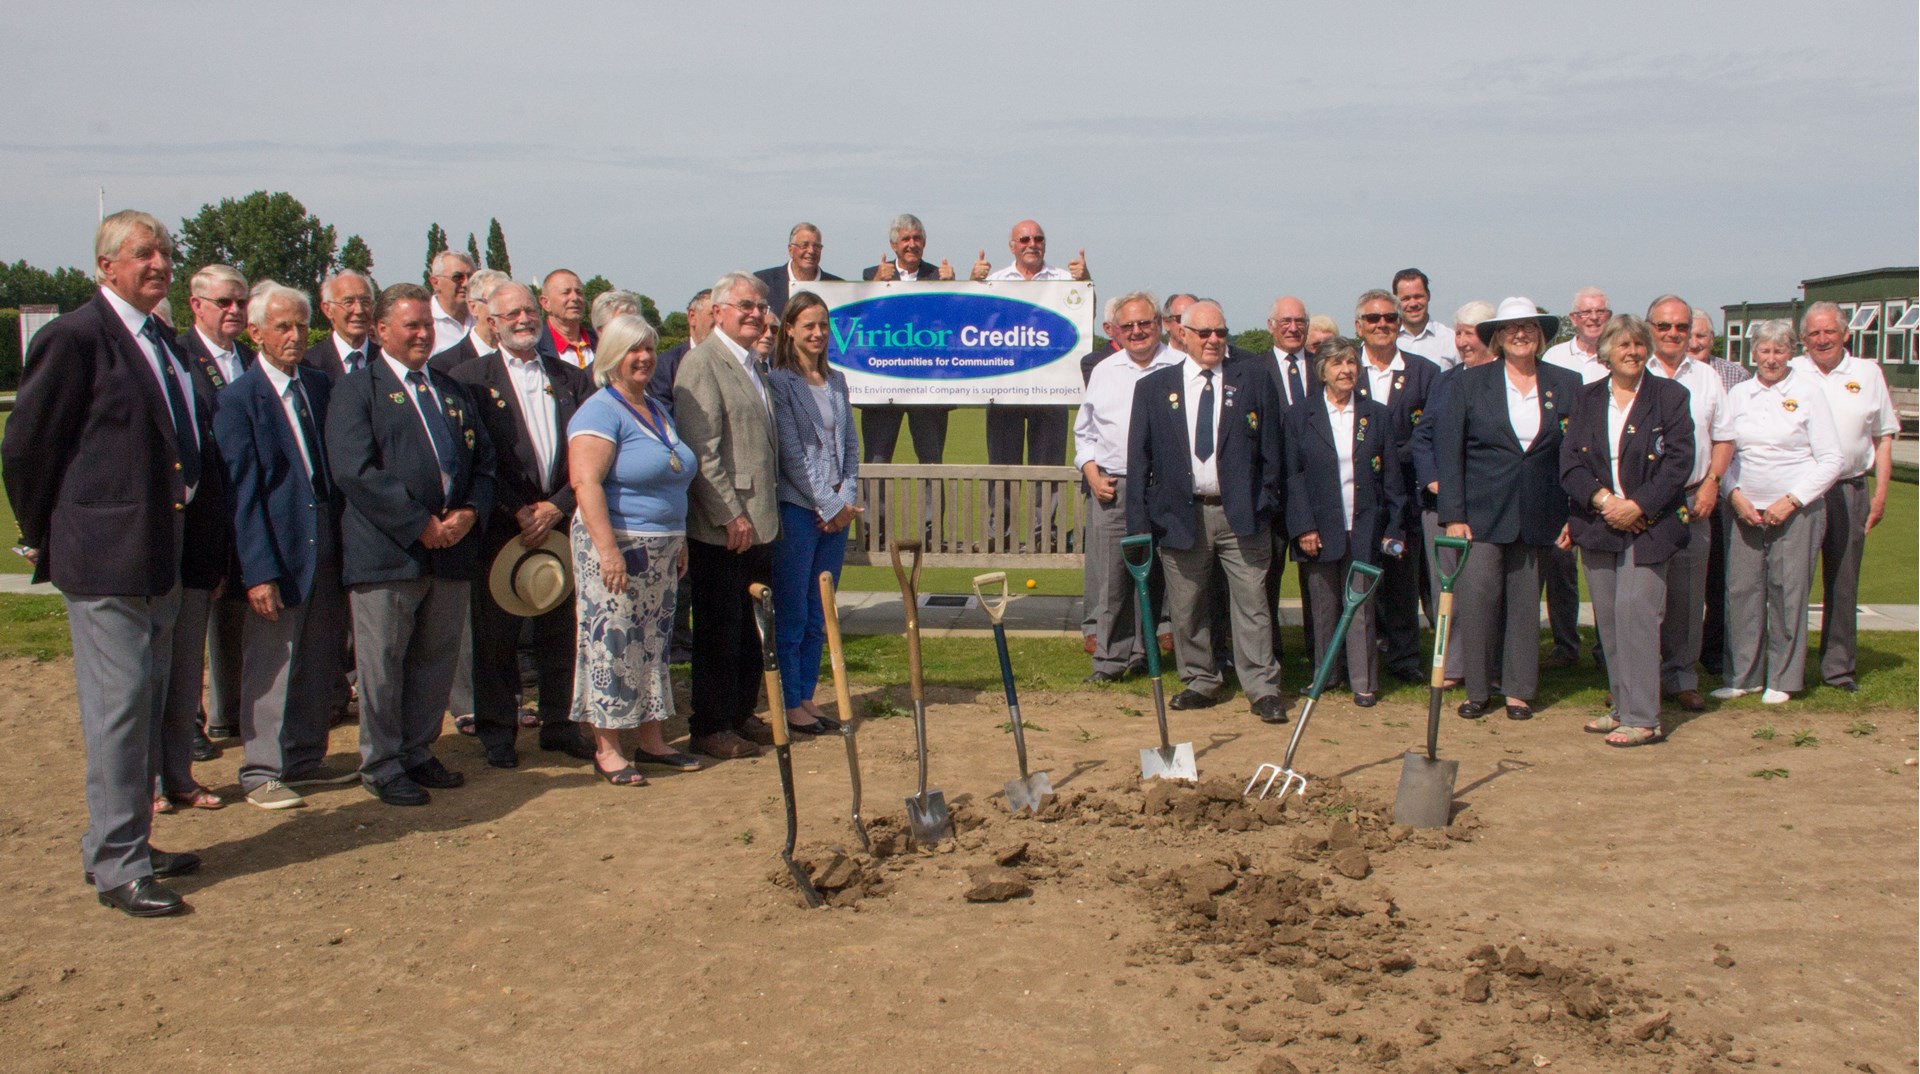 Members and guests at the ground breaking ceremony